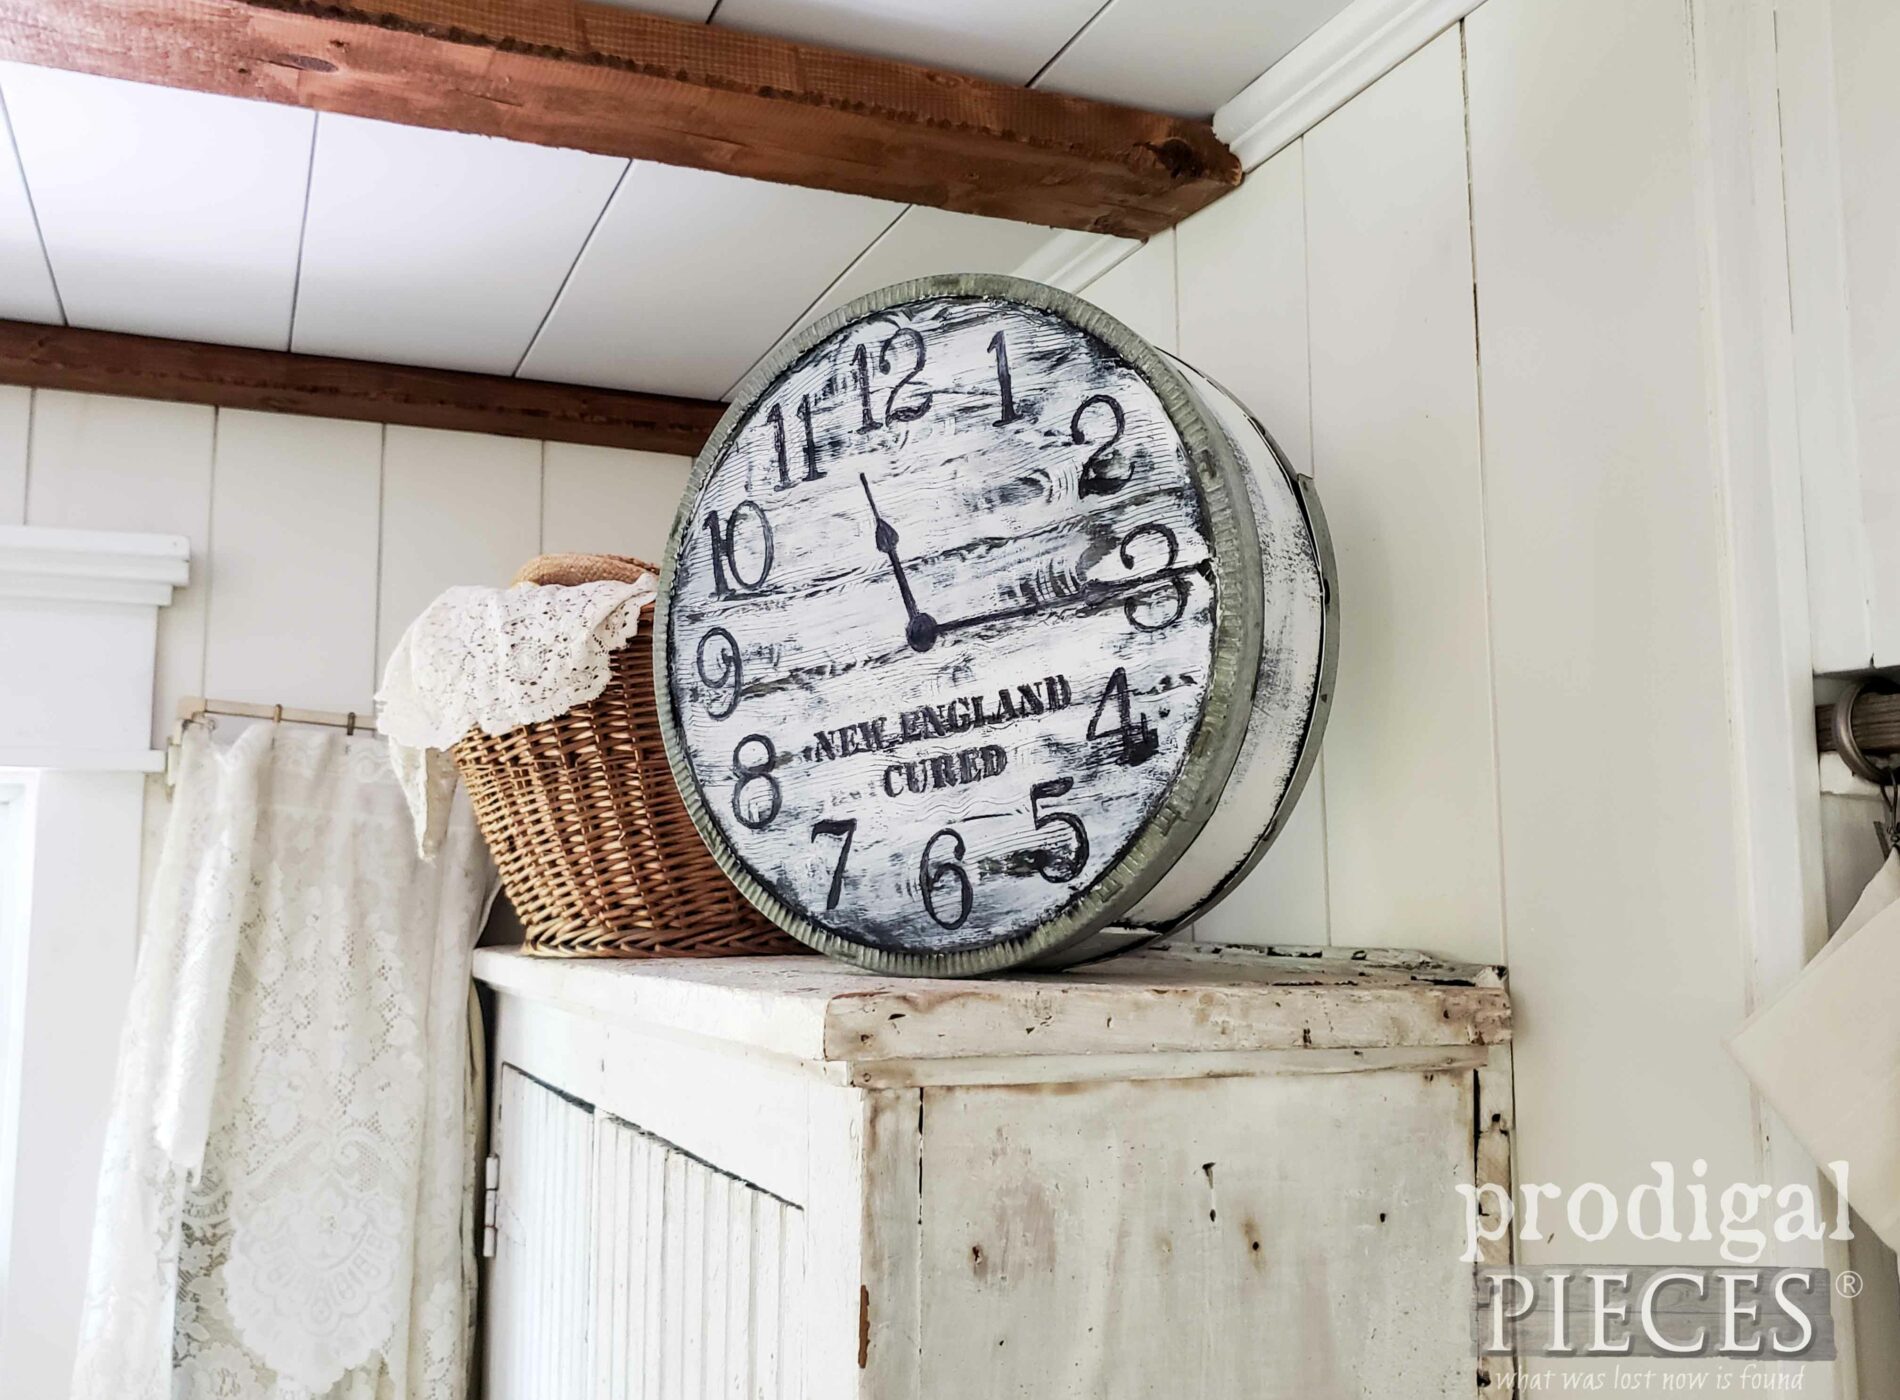 Farmhouse Cheese Box with Clock Face available at Prodigal Pieces | shop.prodigalpieces.com #prodigalpieces